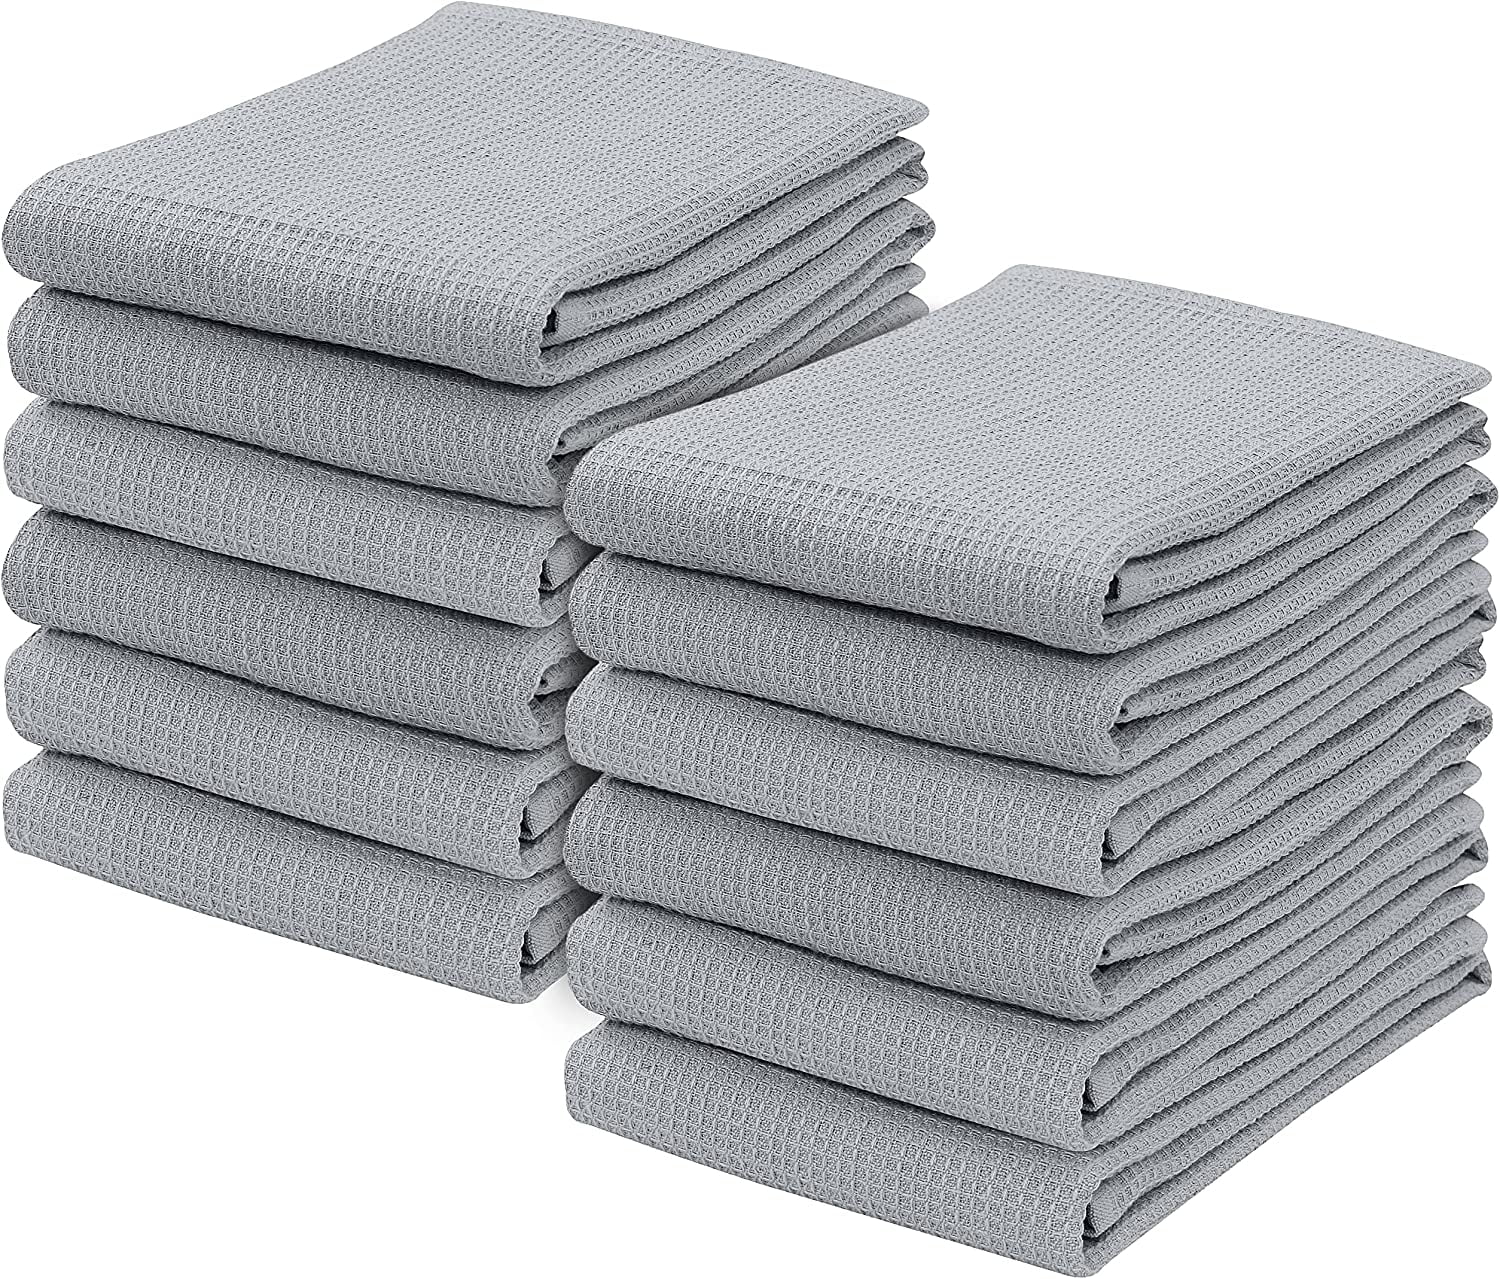 VeraSong Waffle Weave Kitchen Towels Thick Microfiber Dish Drying Towels  Absorbent Tea Towels Hand Towel Lint Free 16Inch x 24Inch 3 Pack Khaki